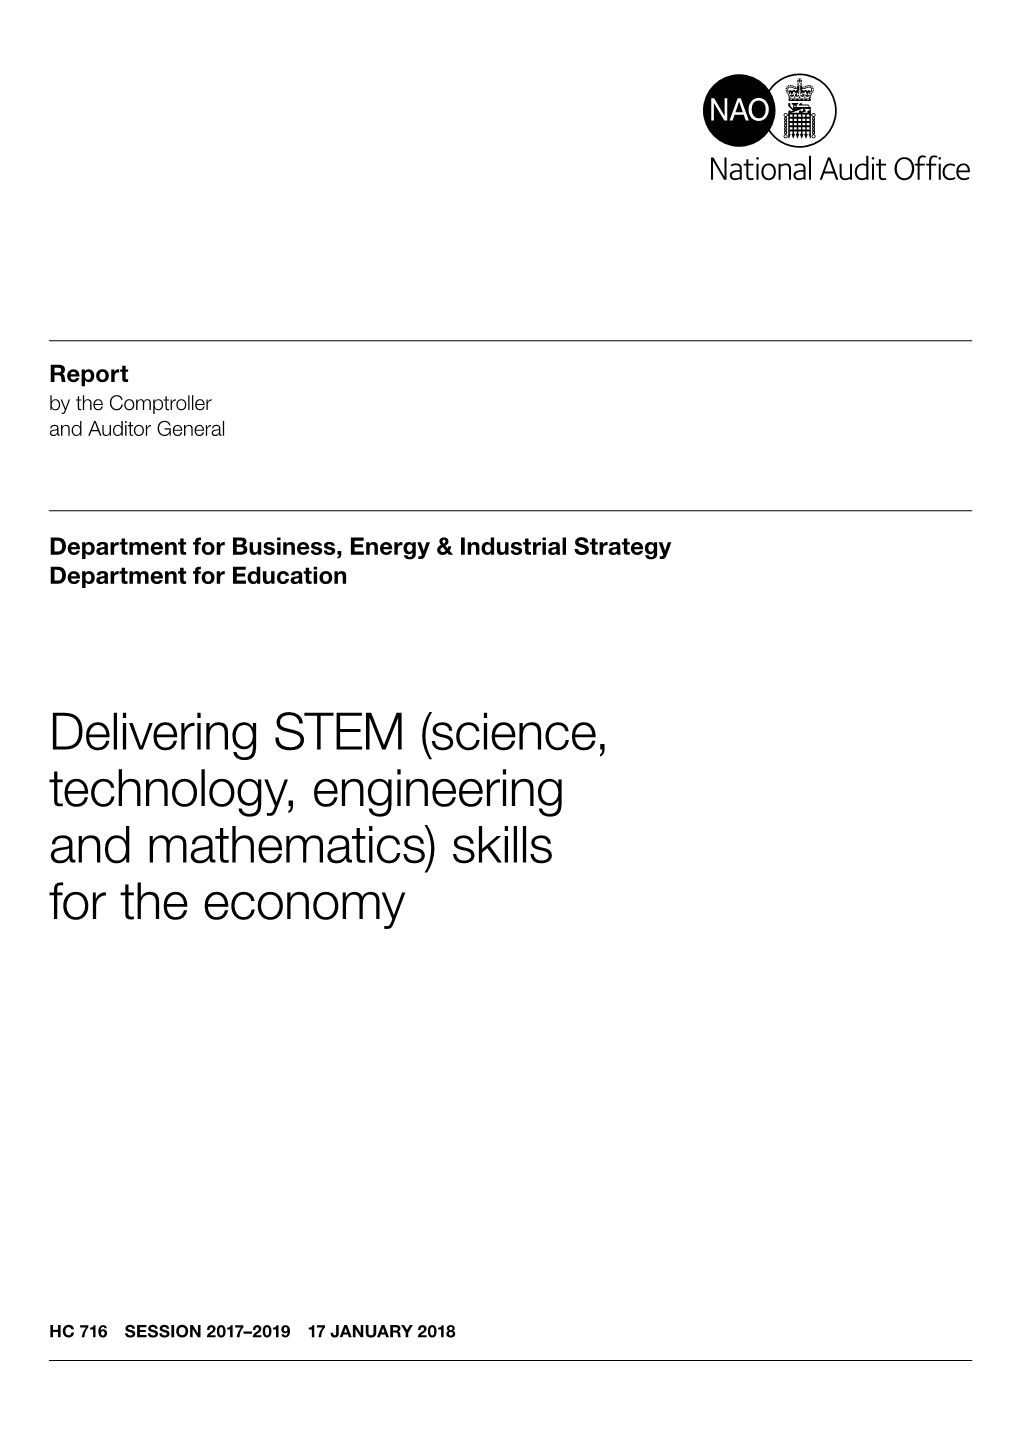 Delivering STEM (Science, Technology, Engineering and Mathematics) Skills for the Economy